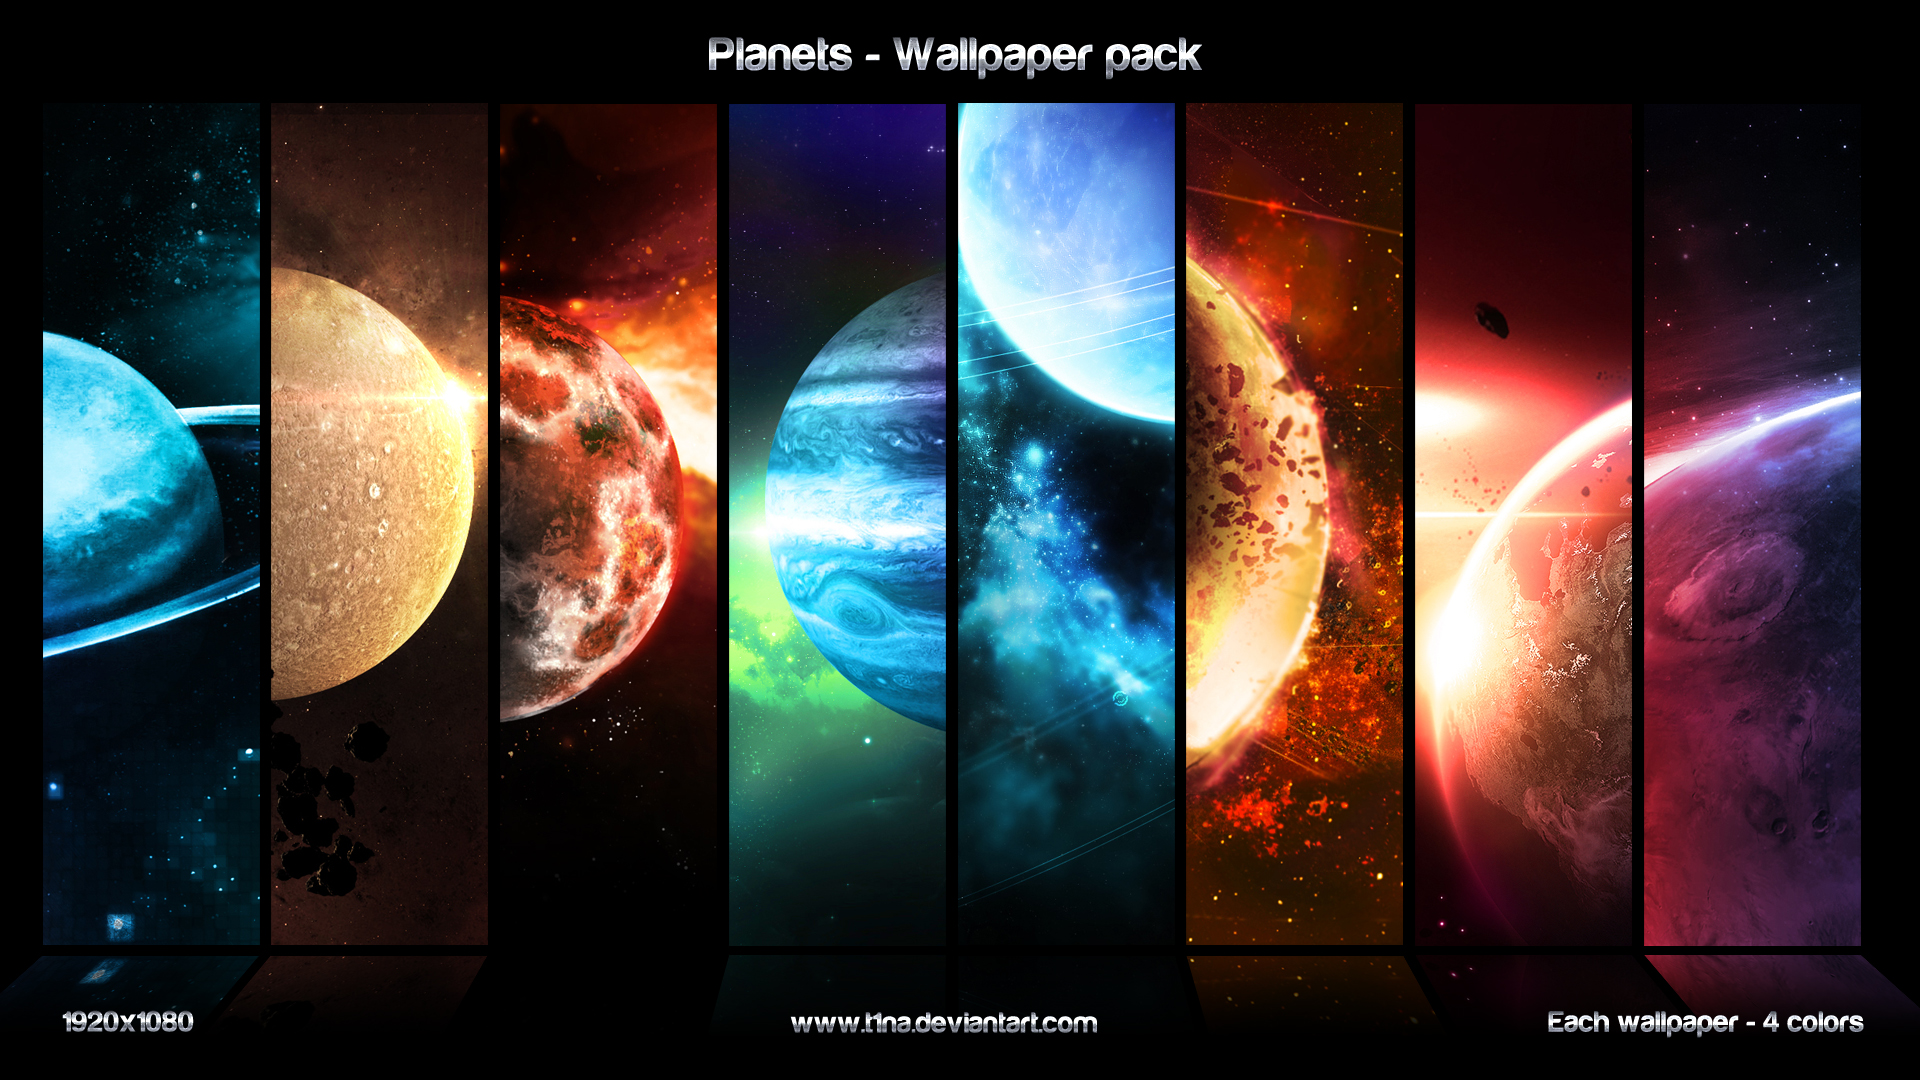 planets wallpaper pack by t1na customization wallpaper hdtv widescreen 1920x1080